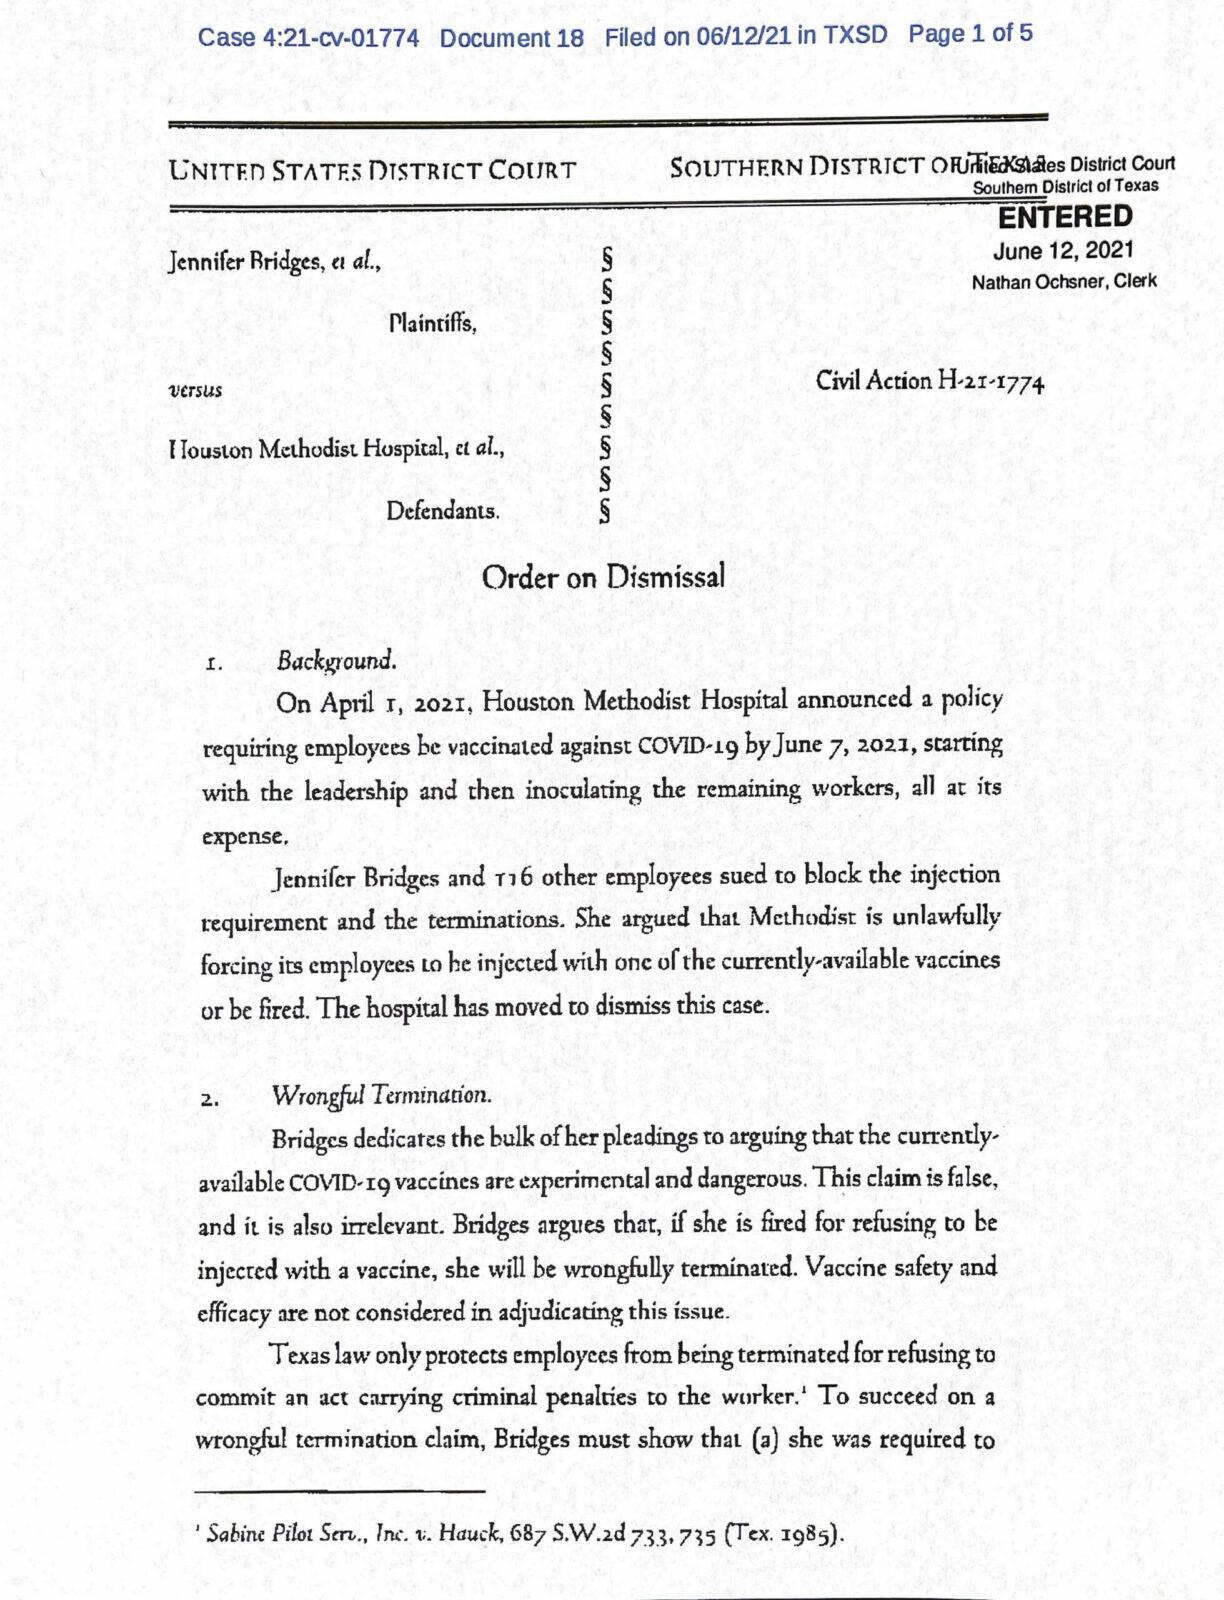 United States District Court Document - Order on Dismissal Page 1